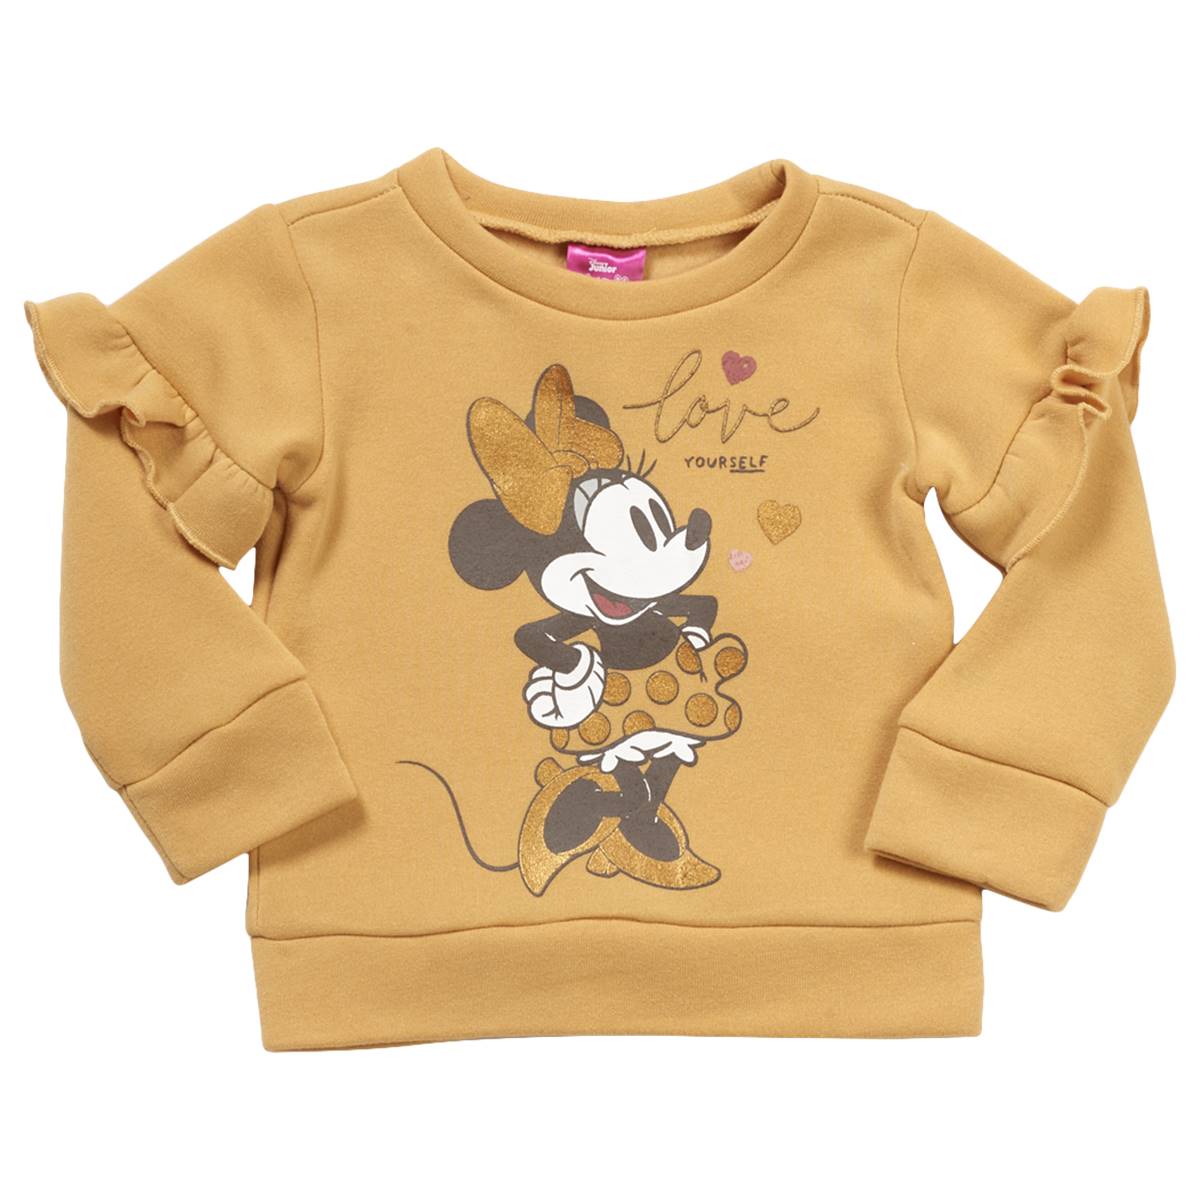 Toddler Girl Disney(R) Minnie Mouse Love Yourself Crewneck